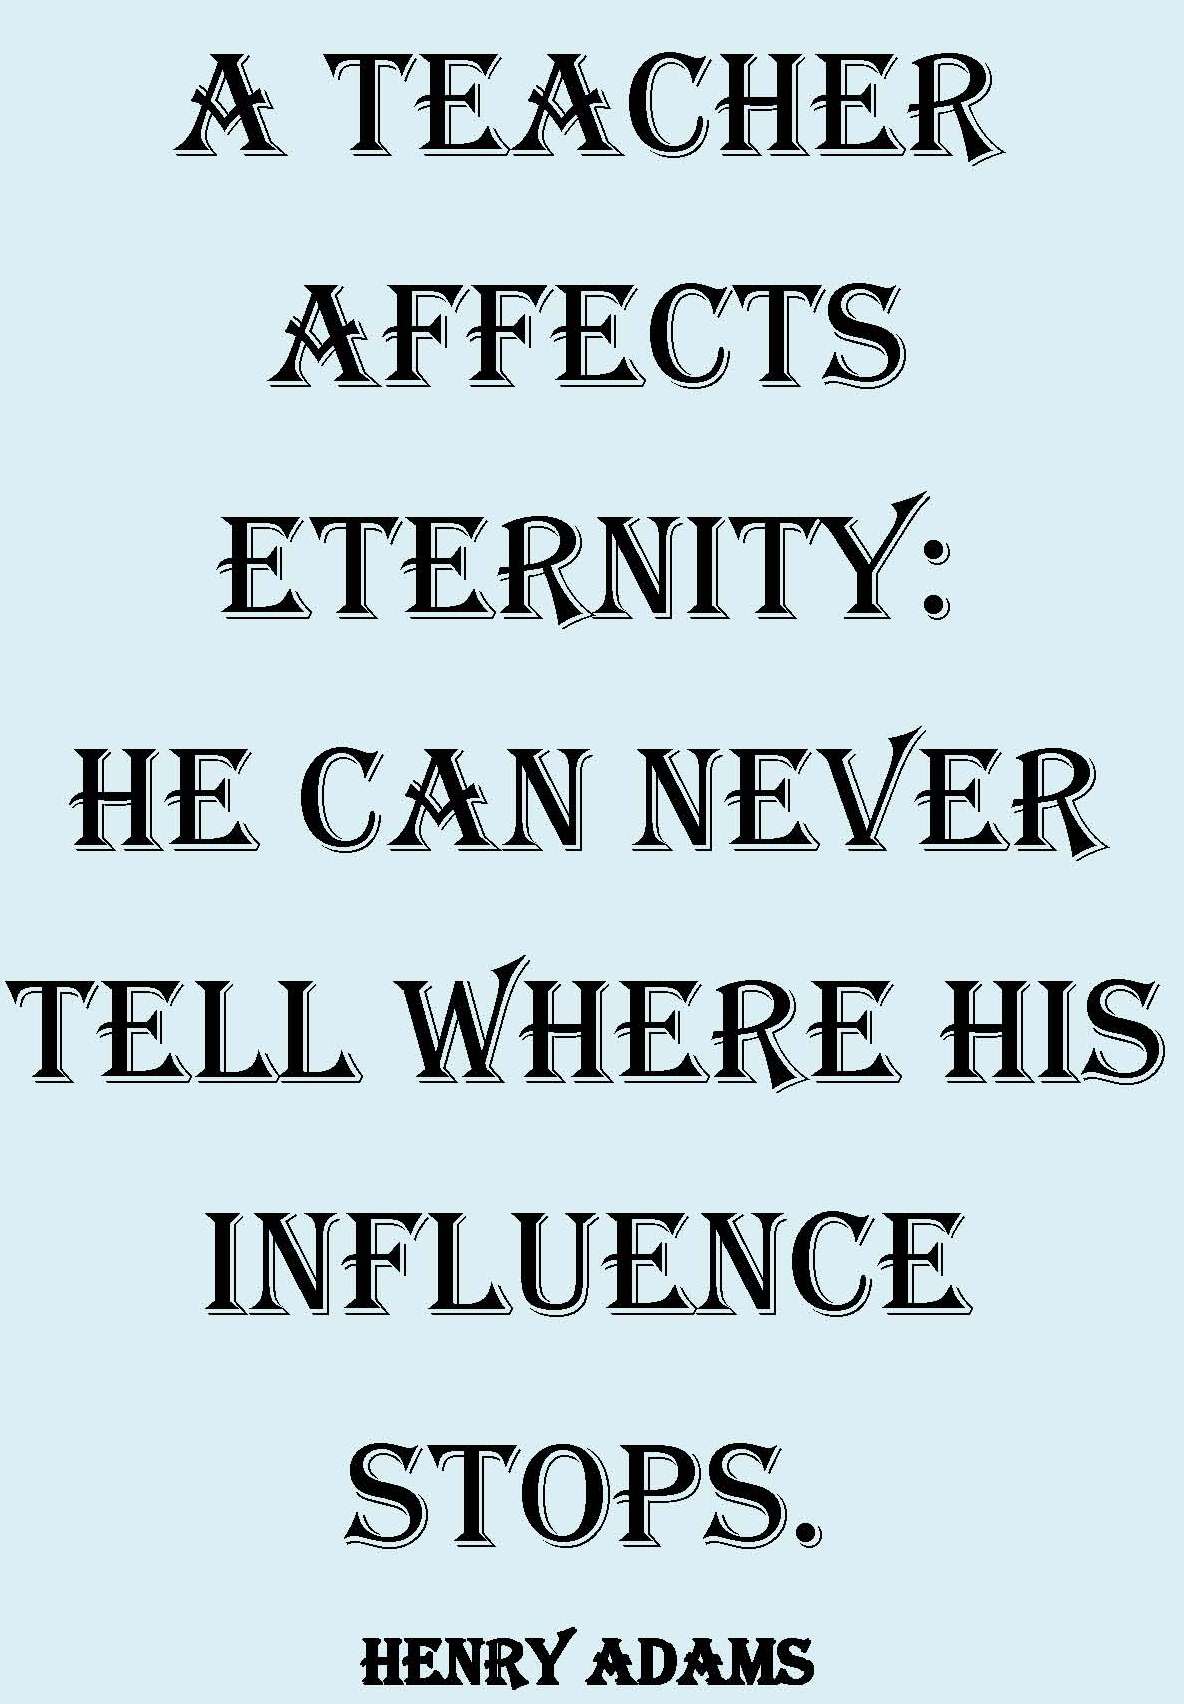 A teacher affects eternity education quote